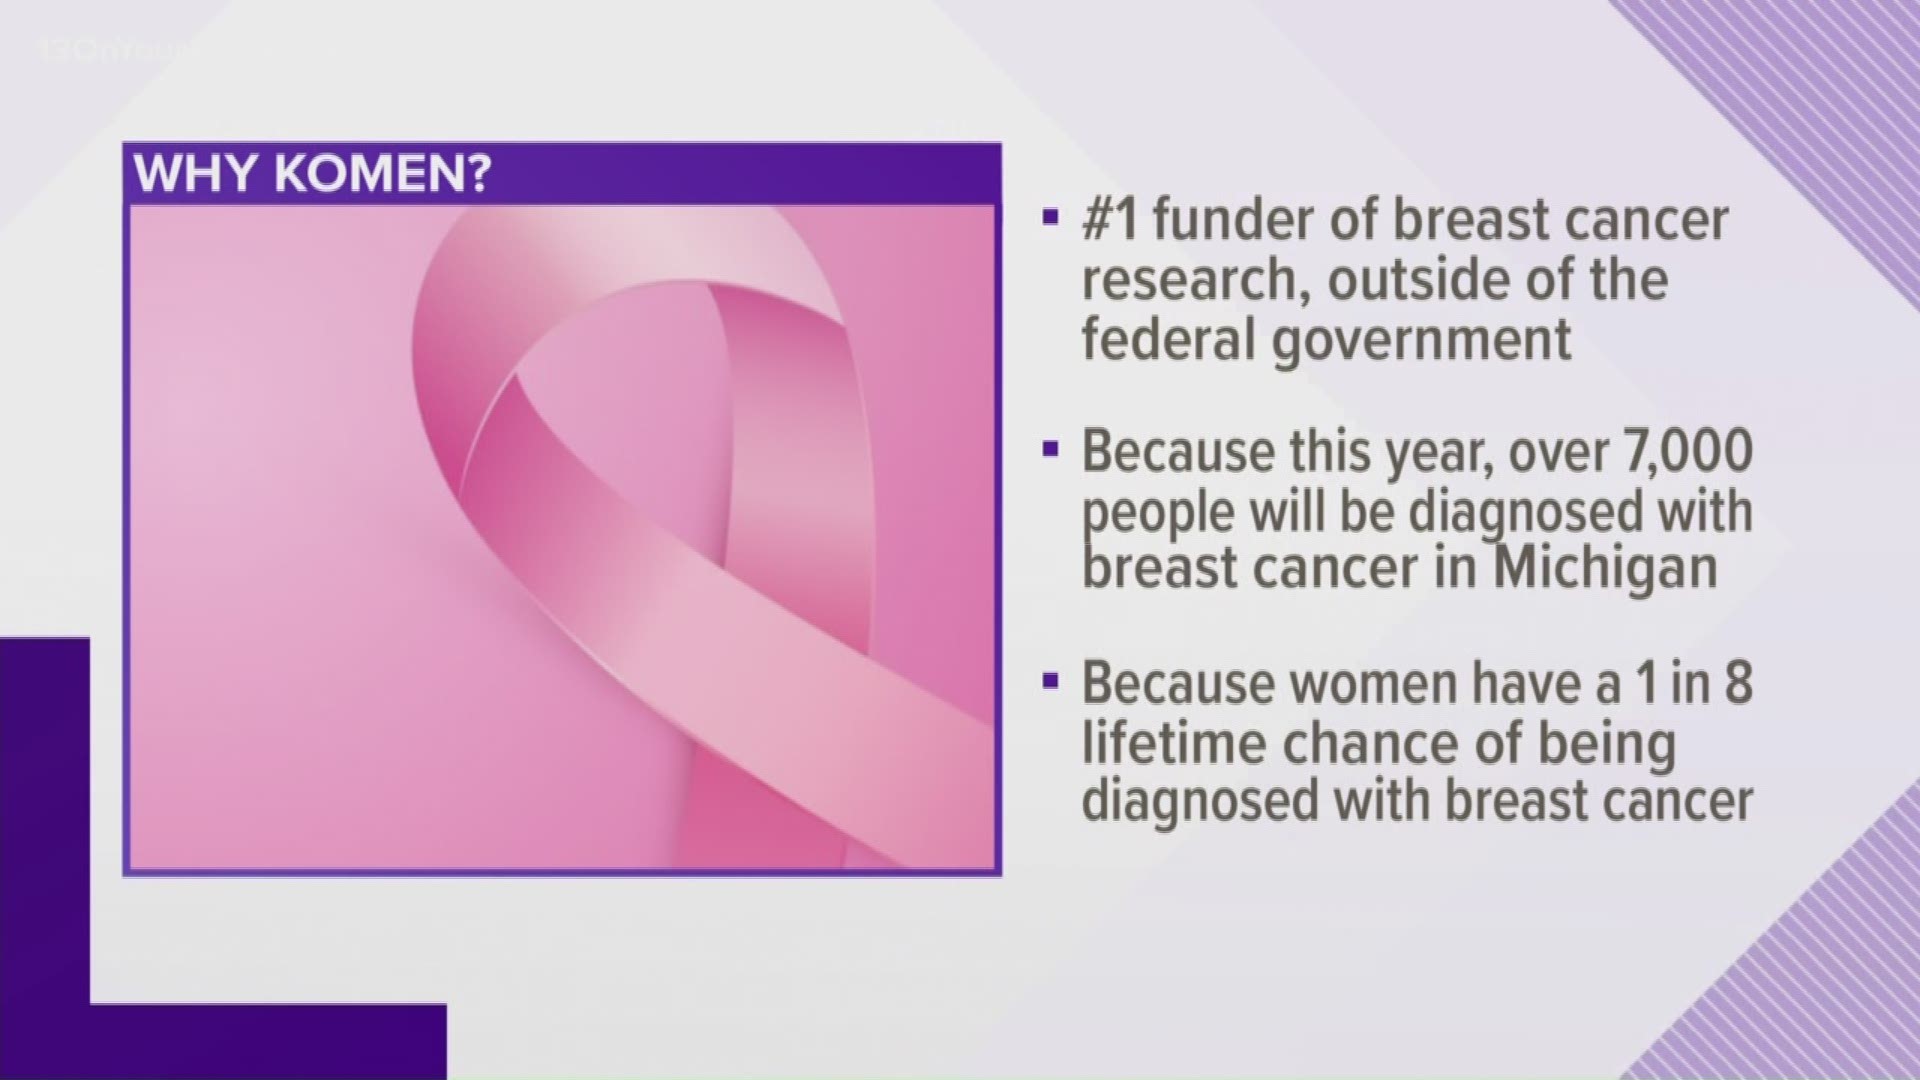 It's November 13th, "Friends for Life Day." Don't forget to do a monthly breast self-exam.. know your normal.